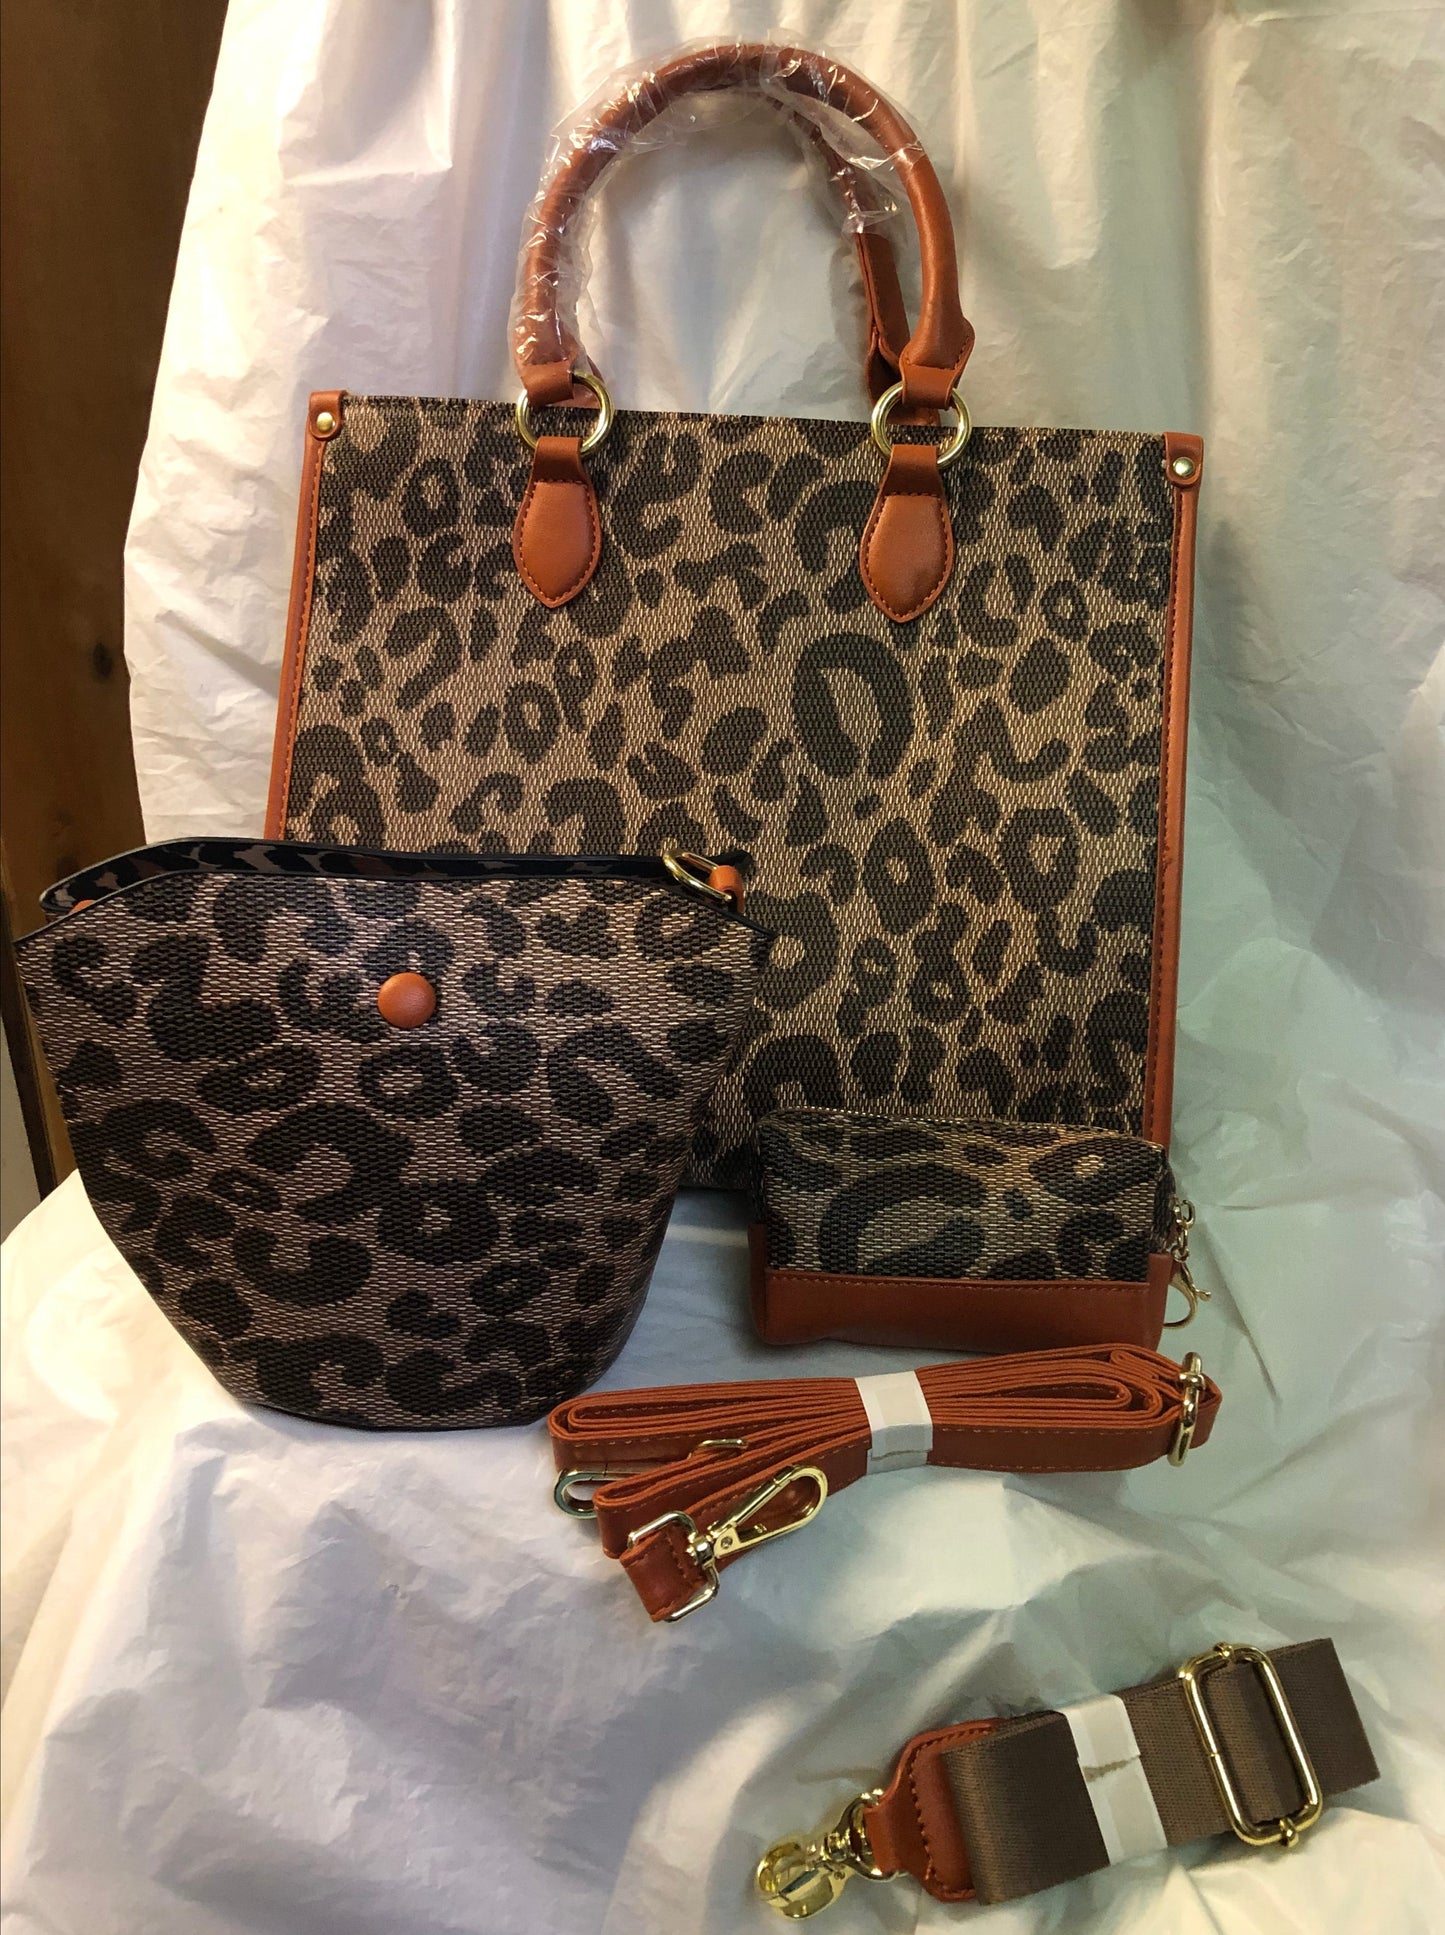 Woman Fabulous Tote 3in 1 Crossbody Bag Cheetah PrintTan Trim "New Arrival" Just In Time For Mother's Day